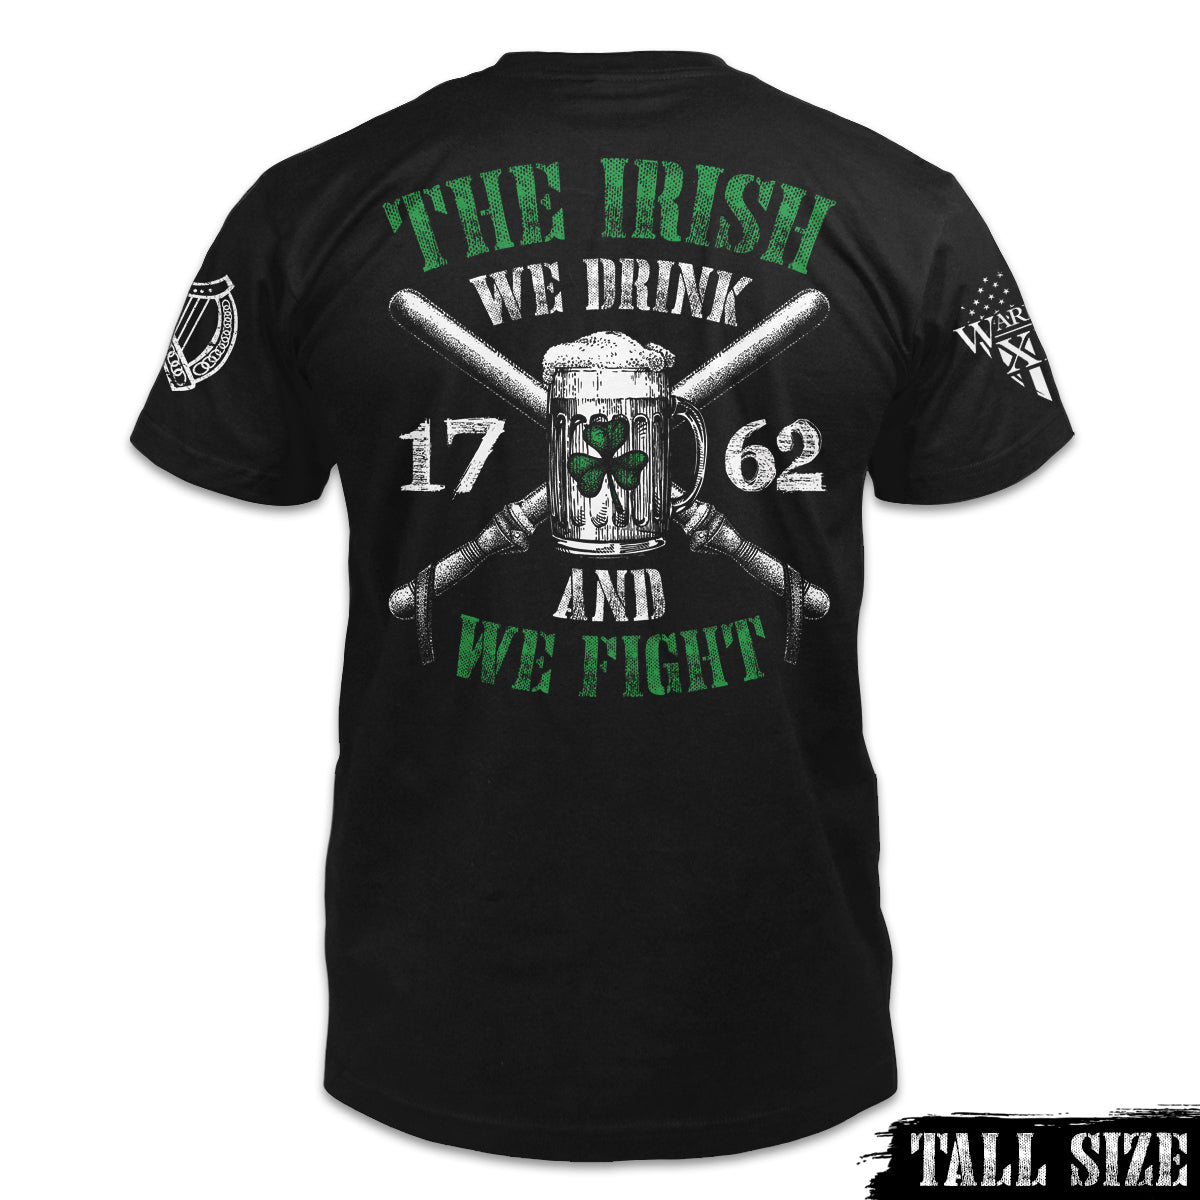 A black tall size shirt with the words "The Irish - We Drink And We Fight" with an Irish beer mug printed on the back of the shirt.